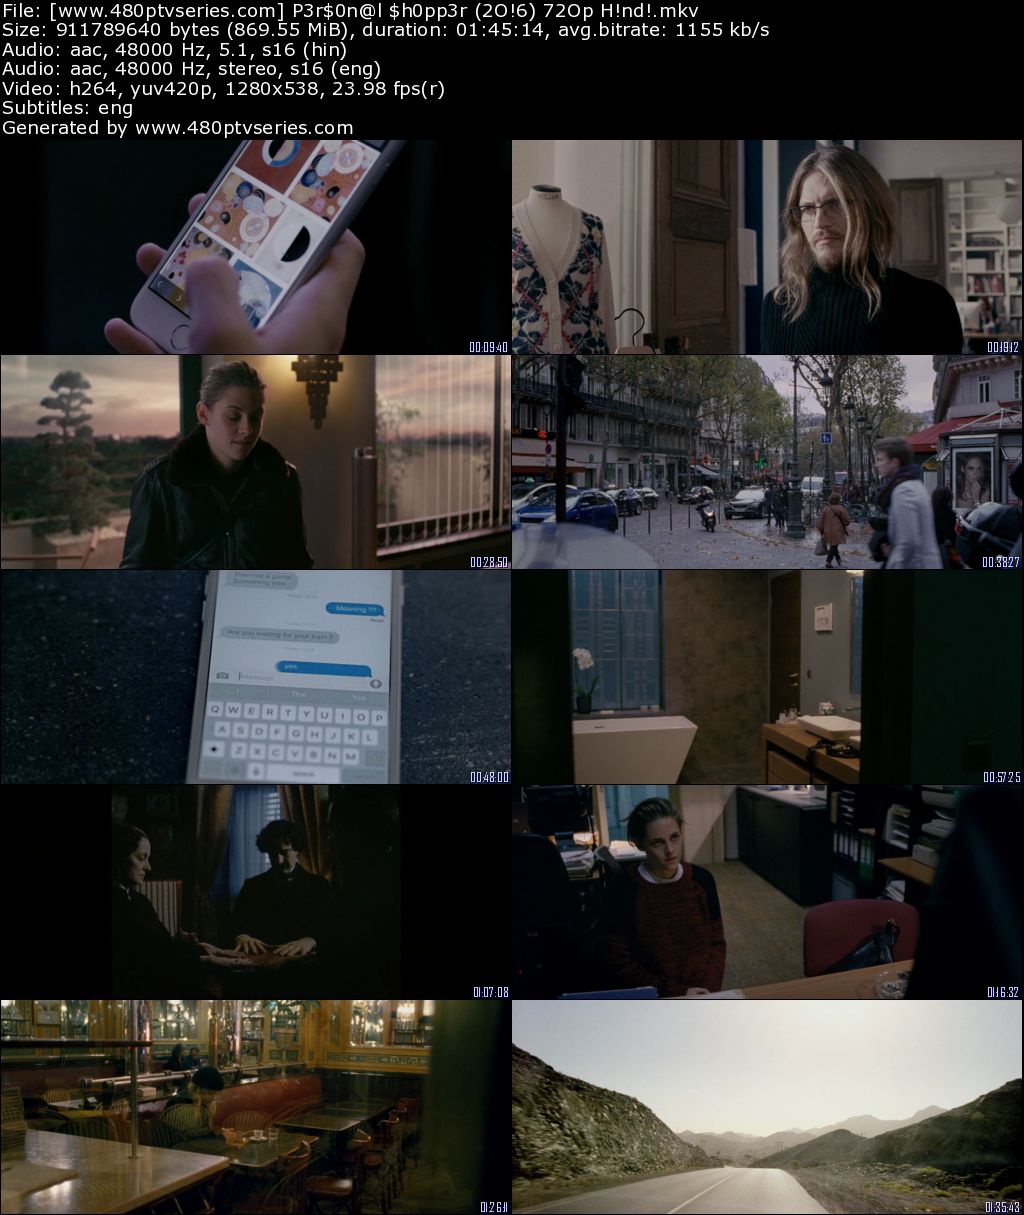 Download Personal Shopper (2016) 850MB Full Hindi Dual Audio Movie Download 720p Bluray Free Watch Online Full Movie Download Worldfree4u 9xmovies